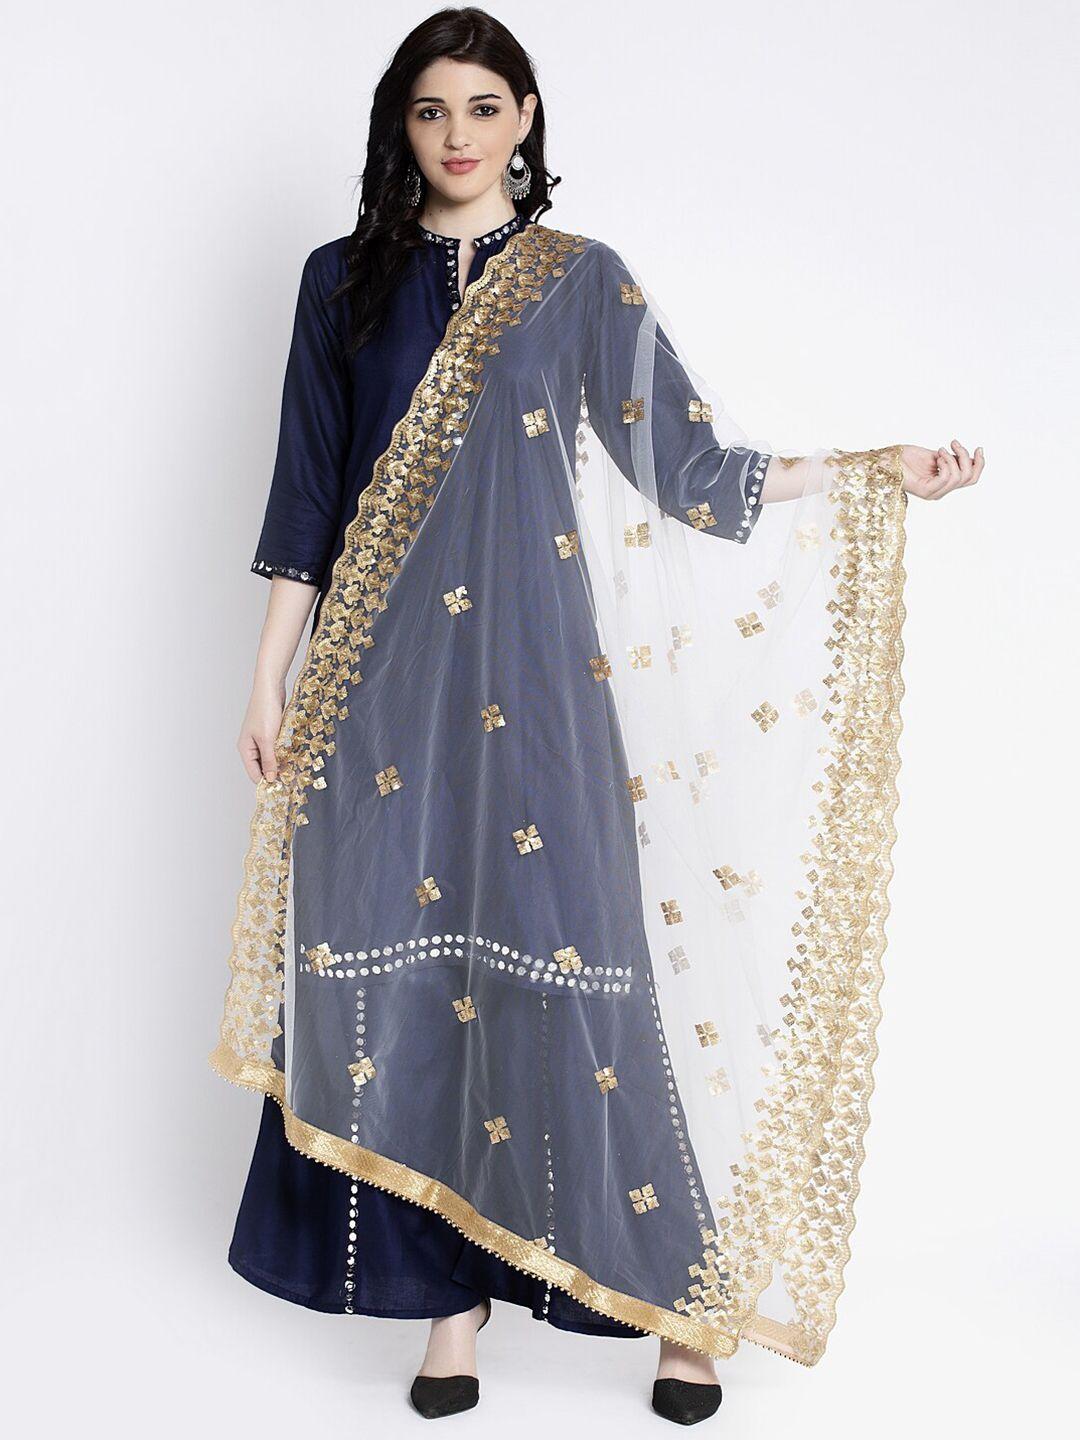 clora-creation-white-&-gold-toned-ethnic-motifs-embroidered-dupatta-with-sequinned